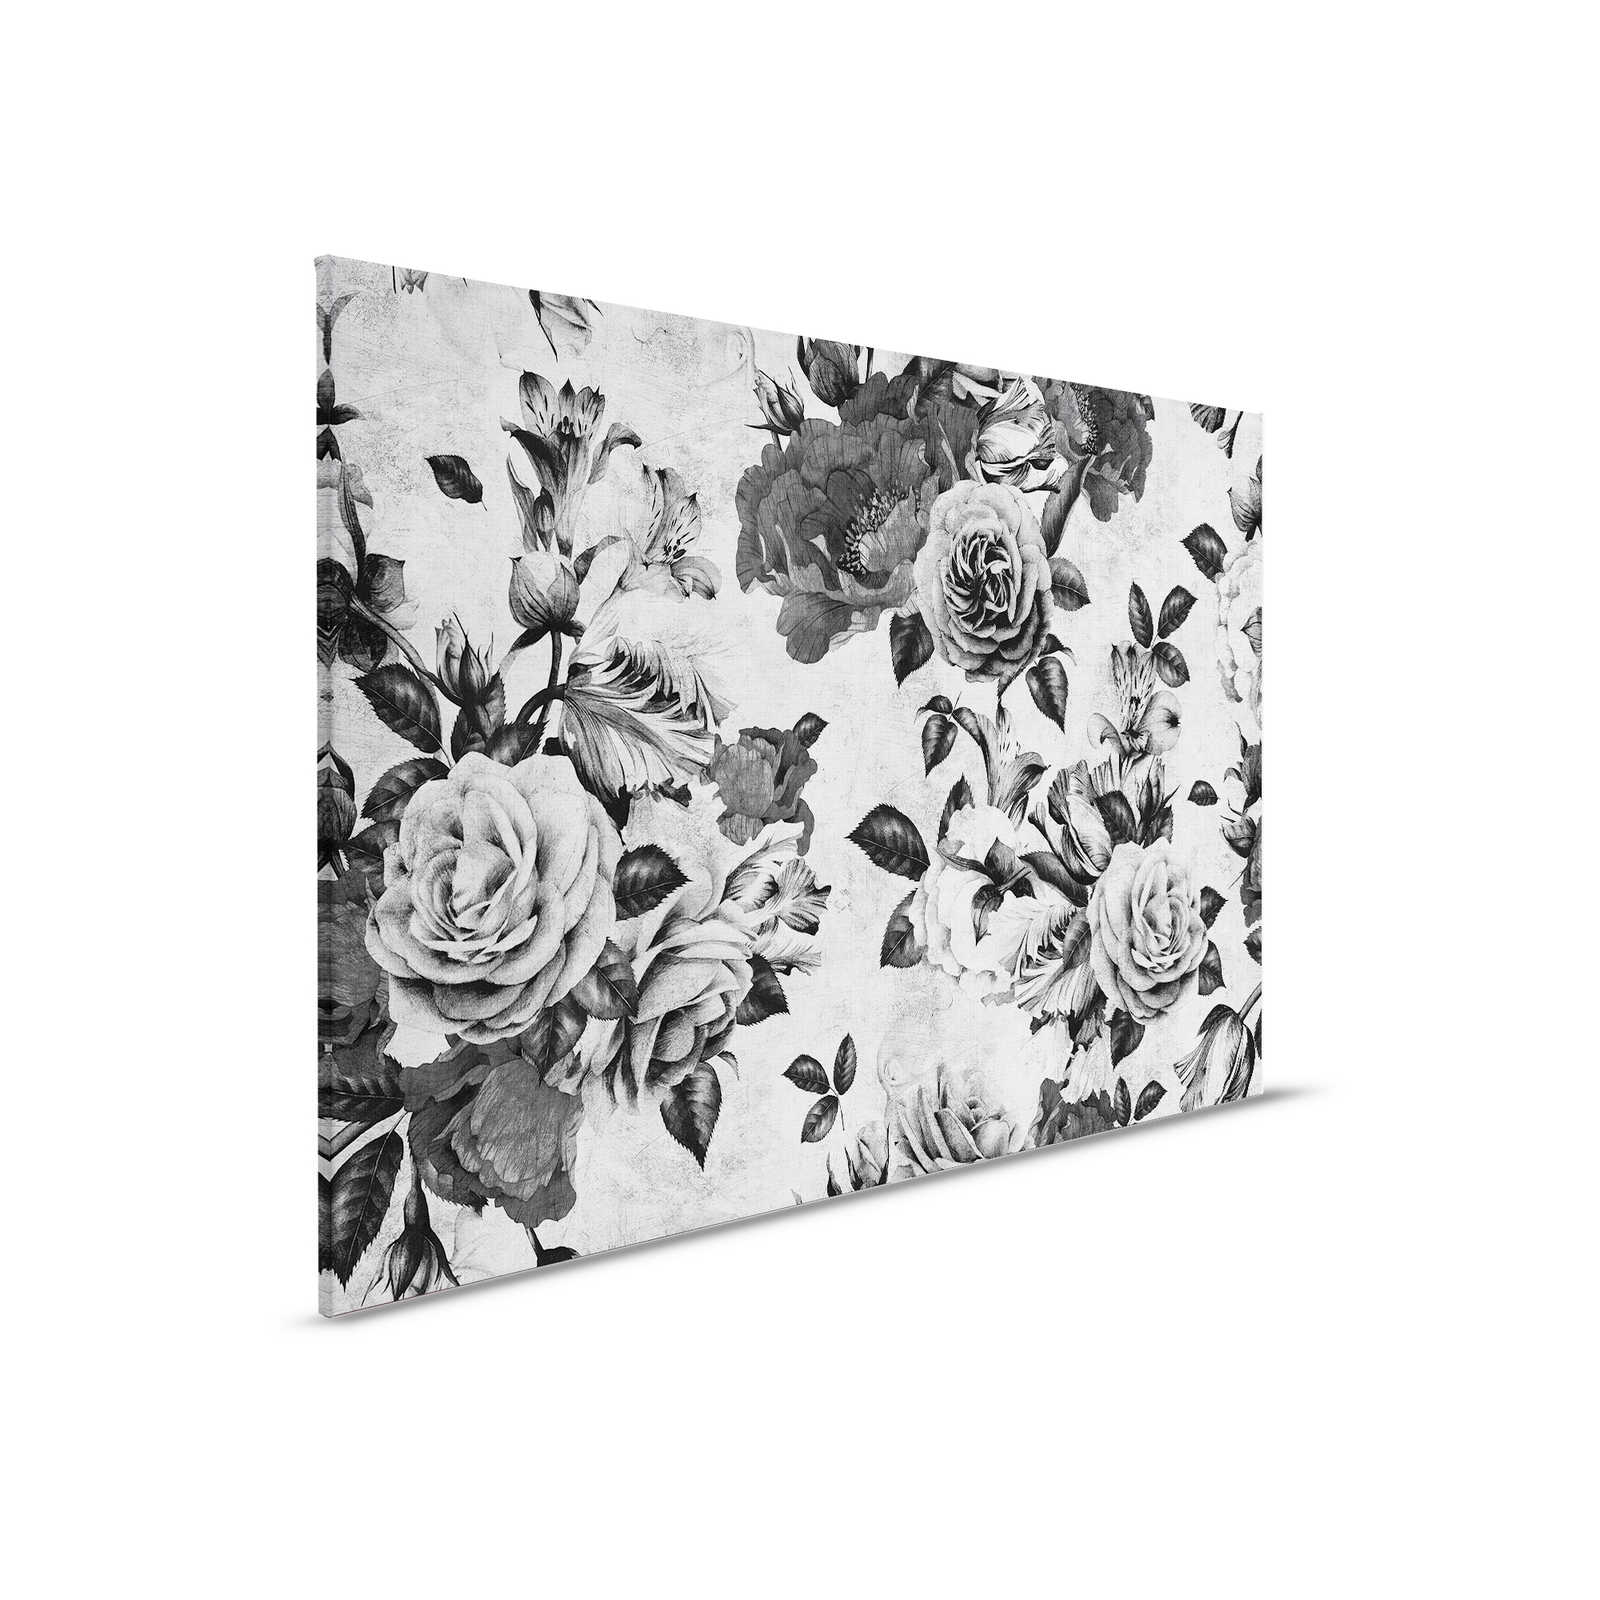         Spanish rose 1 - Roses canvas painting with black and white flowers - 0,90 m x 0,60 m
    